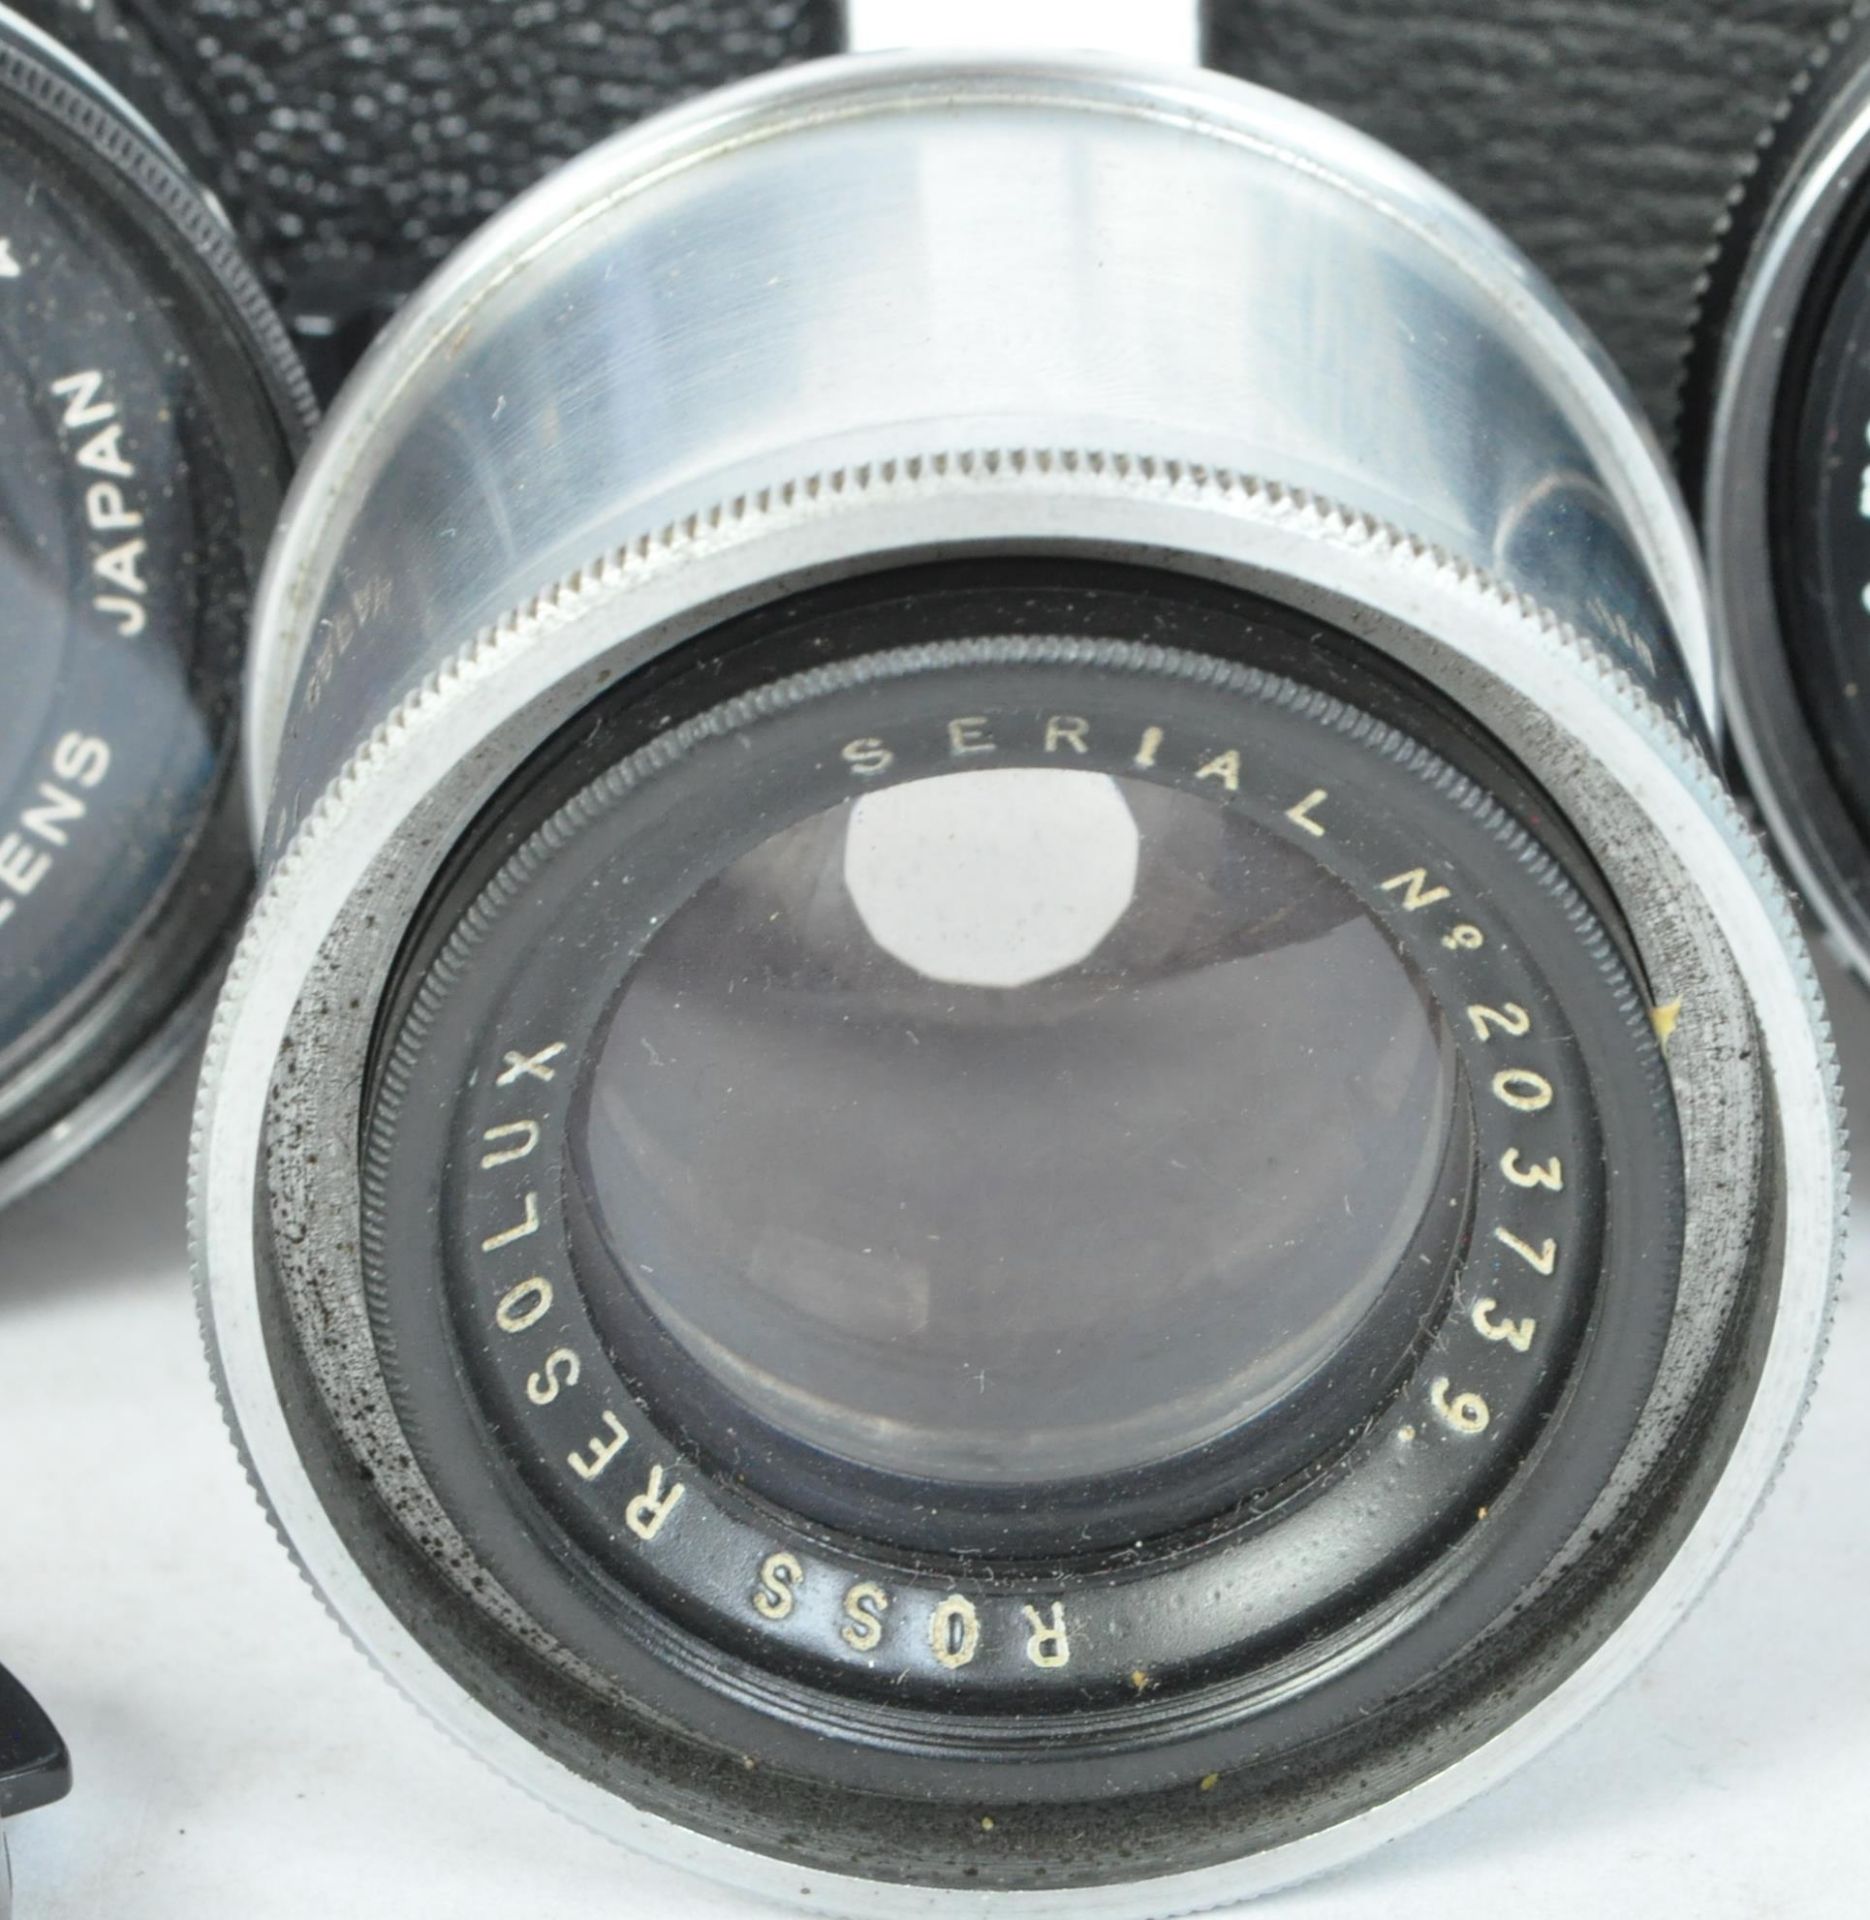 COLLECTION OF VINTAGE CAMERAS & LENS - OLYMPUS, ROSS RESOLUX - Image 4 of 5